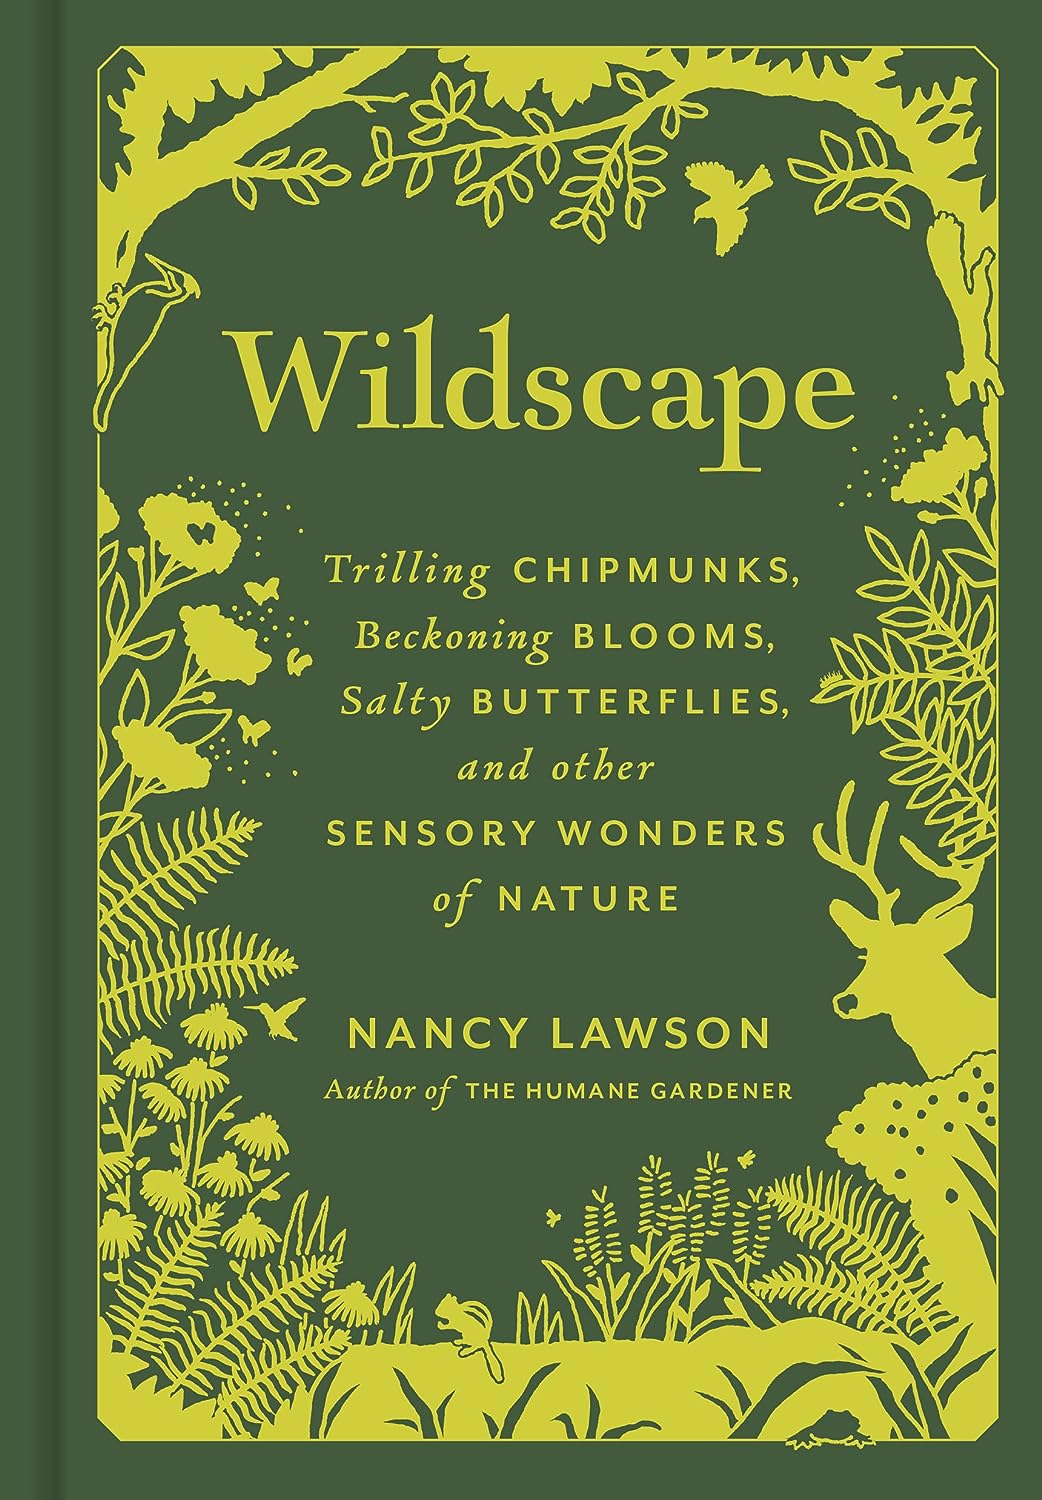 Wildscape: Trilling Chipmunks, Beckoning Blooms, Salty Butterflies, and other Sensory Wonders of Nature [Nancy Lawson]